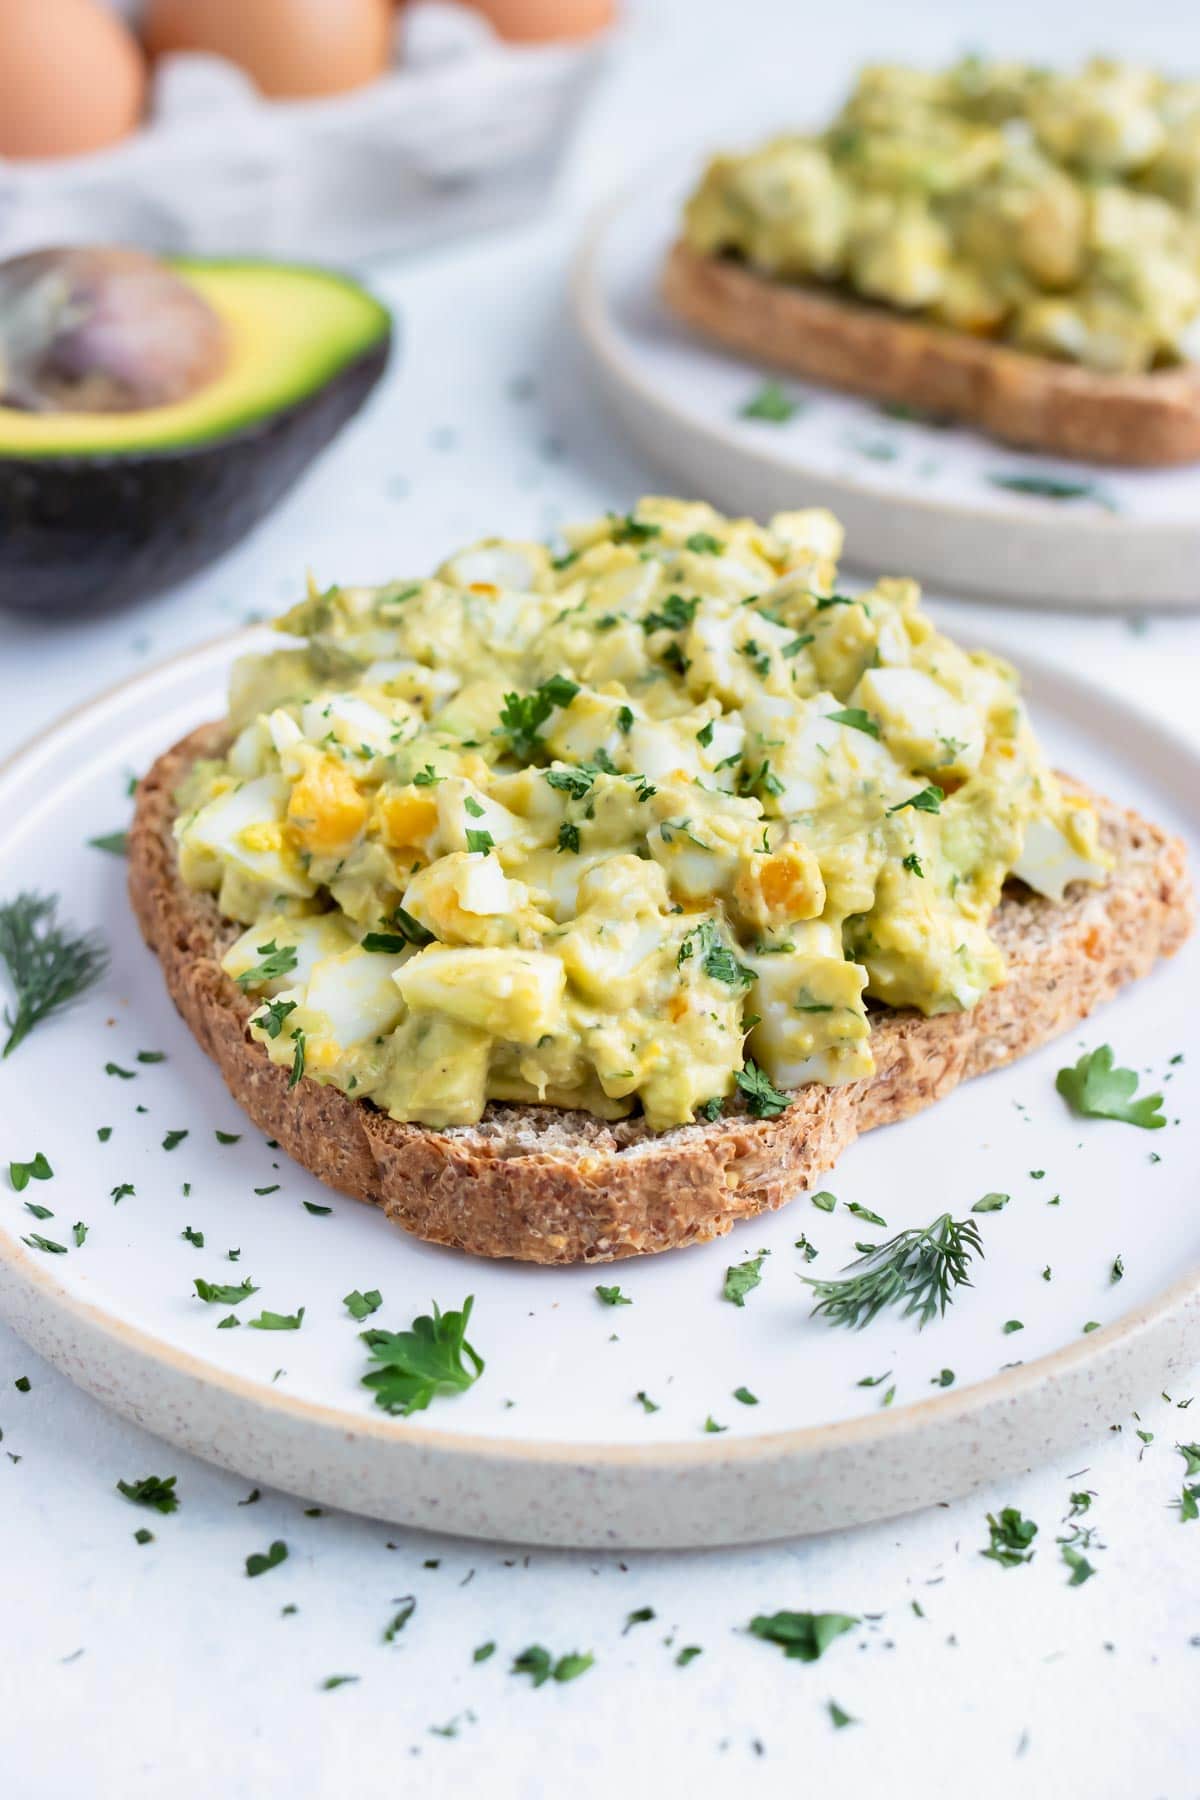 Avocado egg salad sandwiches are served on white plates.